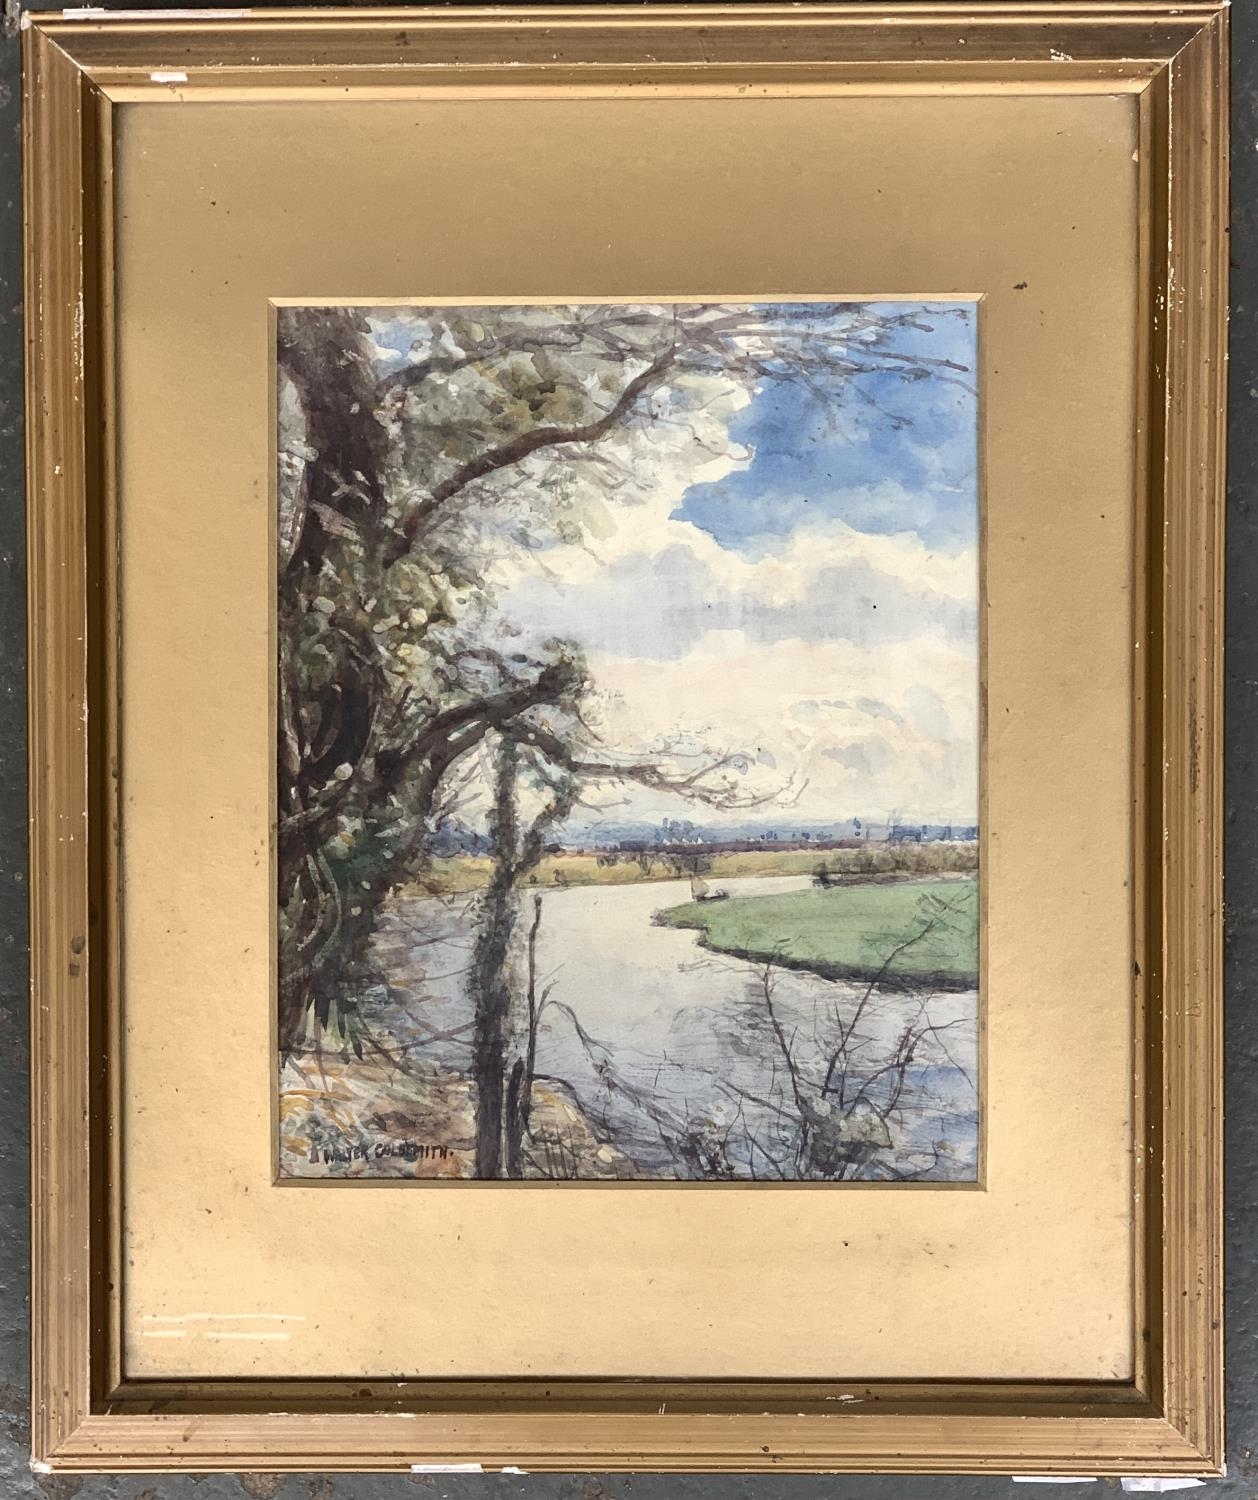 Walter Goldsmith (1857-1943), watercolour of a river landscape, signed lower left, 25x20cm